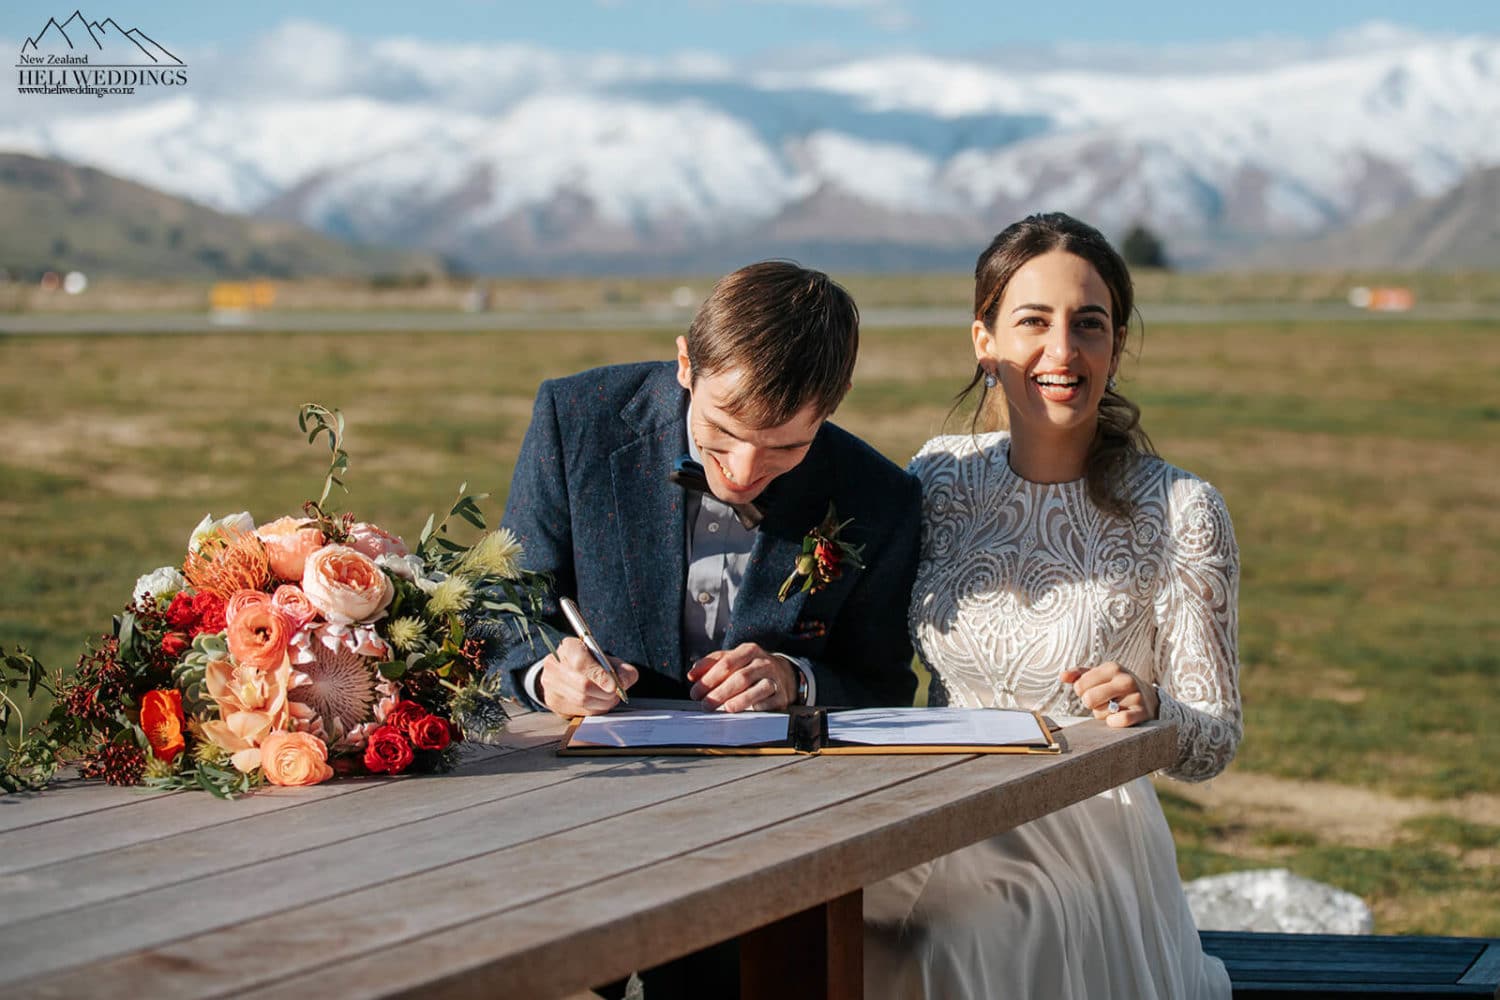 Signing the wedding licence in Queenstown